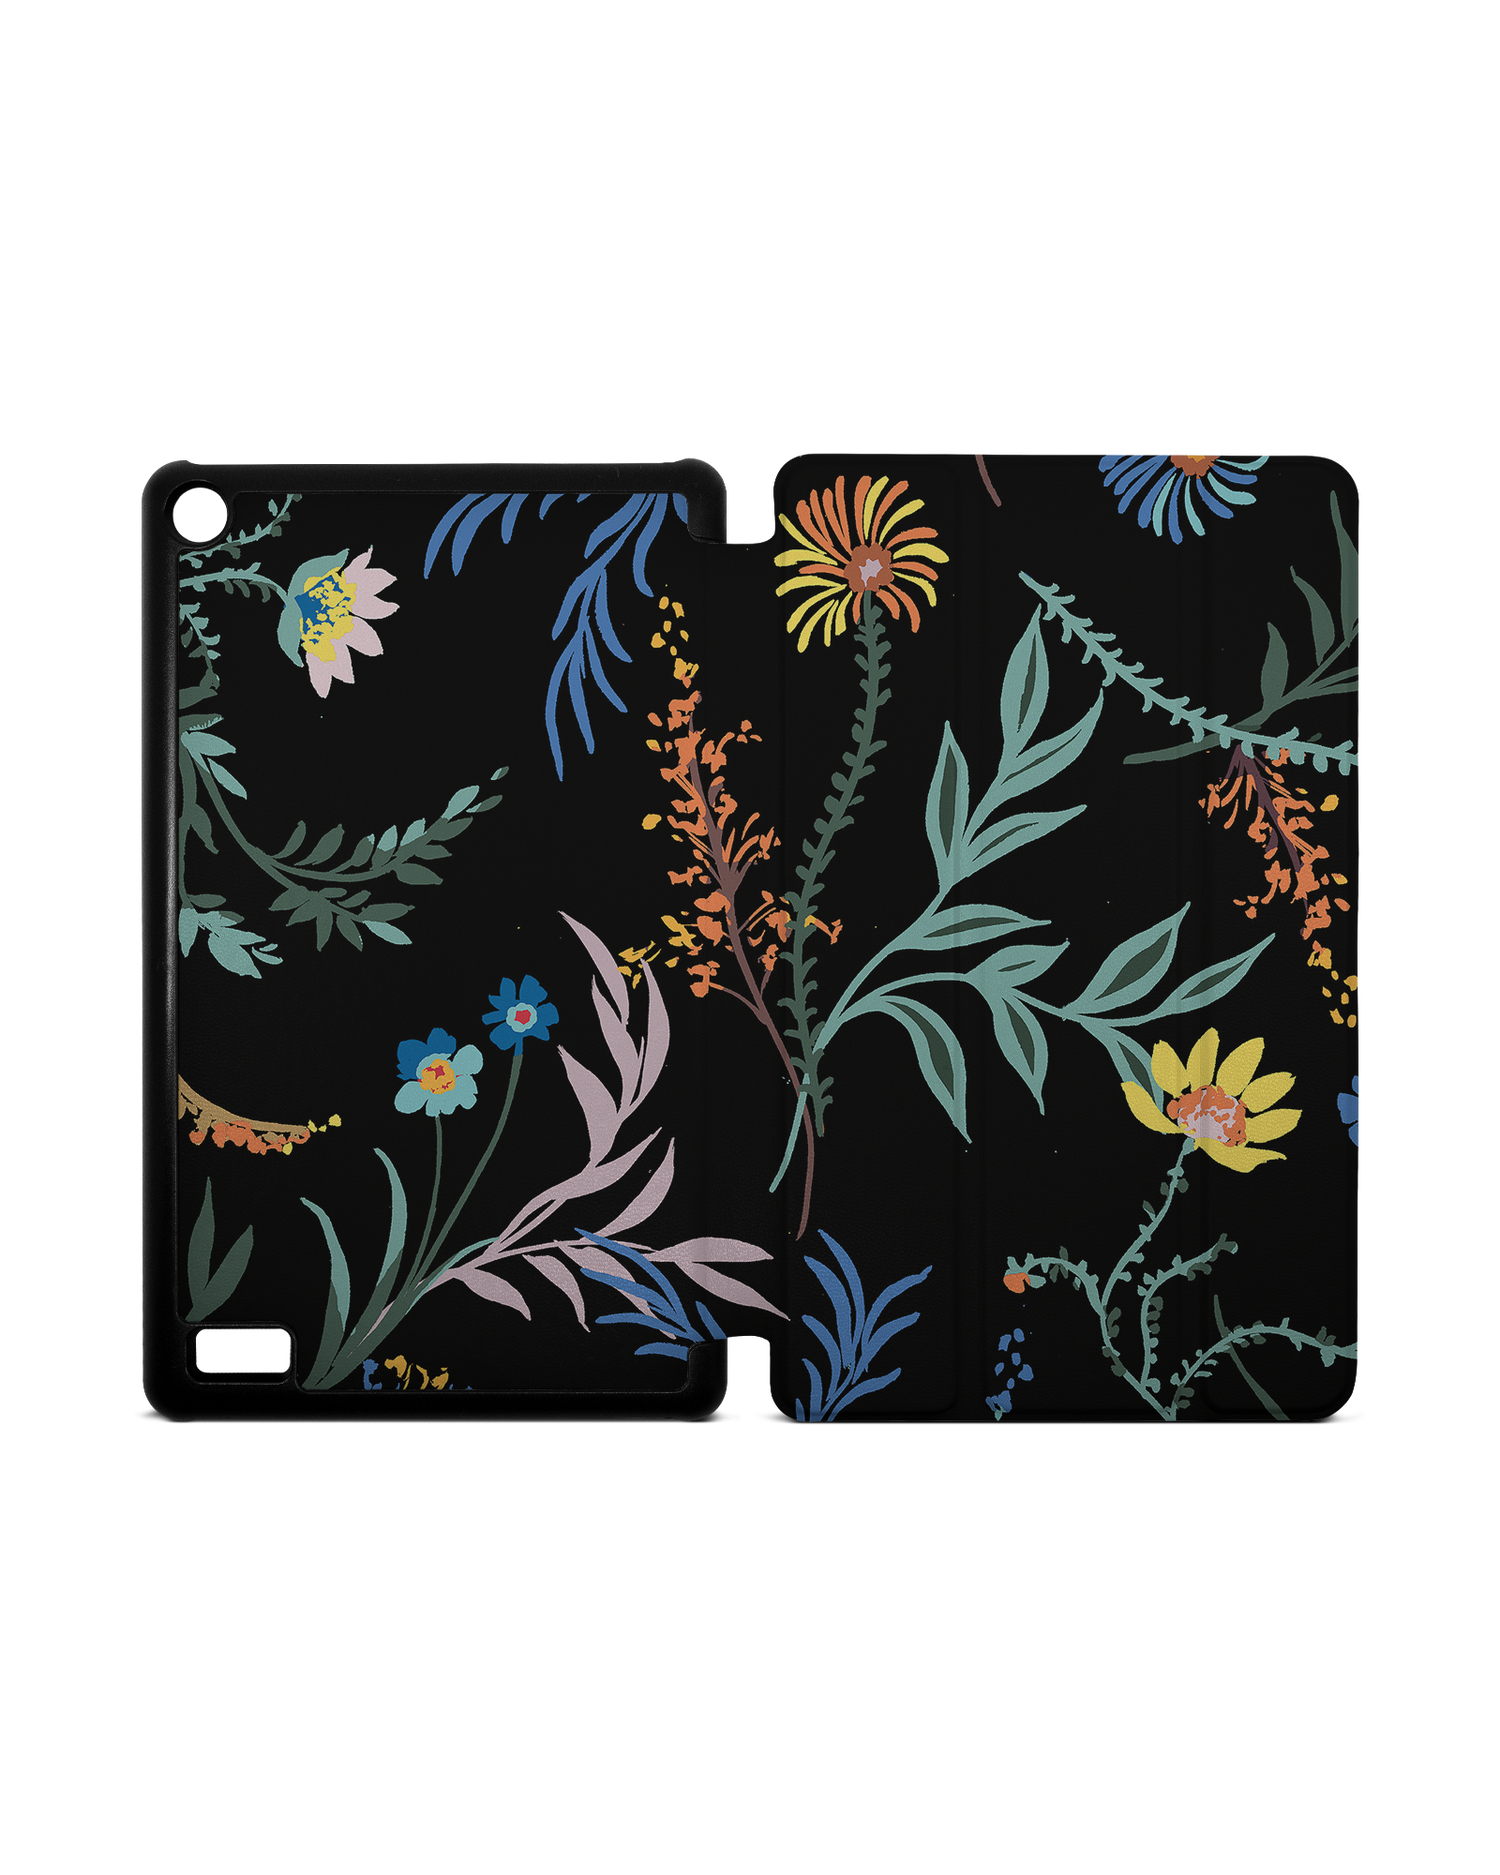 Woodland Spring Floral Tablet Smart Case for Amazon Fire 7: Opened